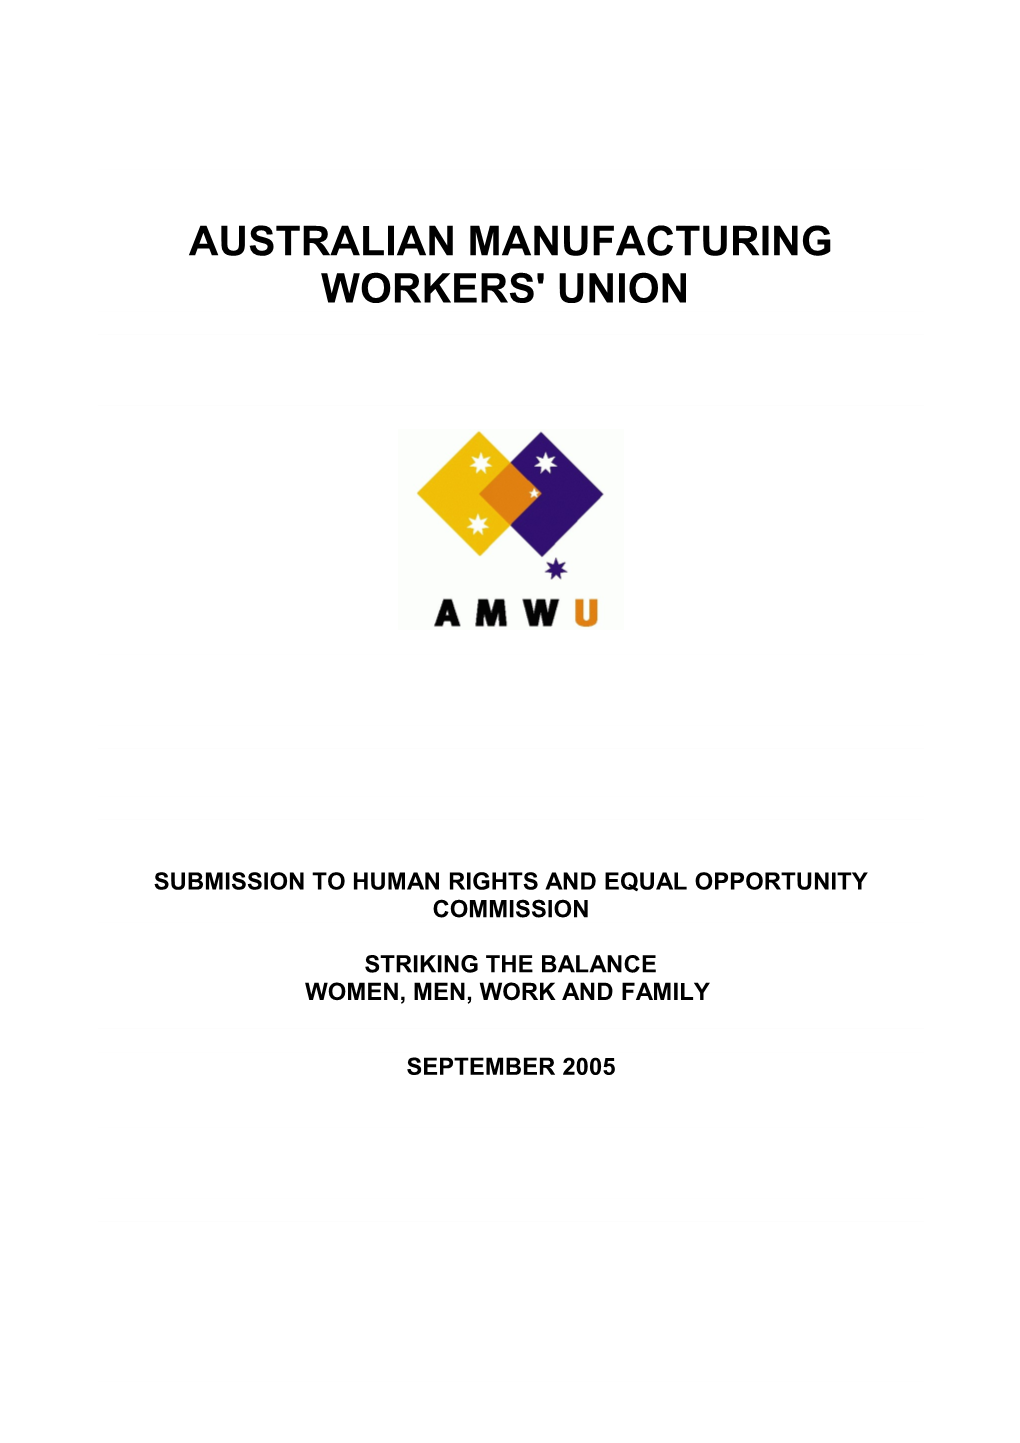 Whether the Objectives of Various Forms of Industrial Agreement-Making, Including Australian